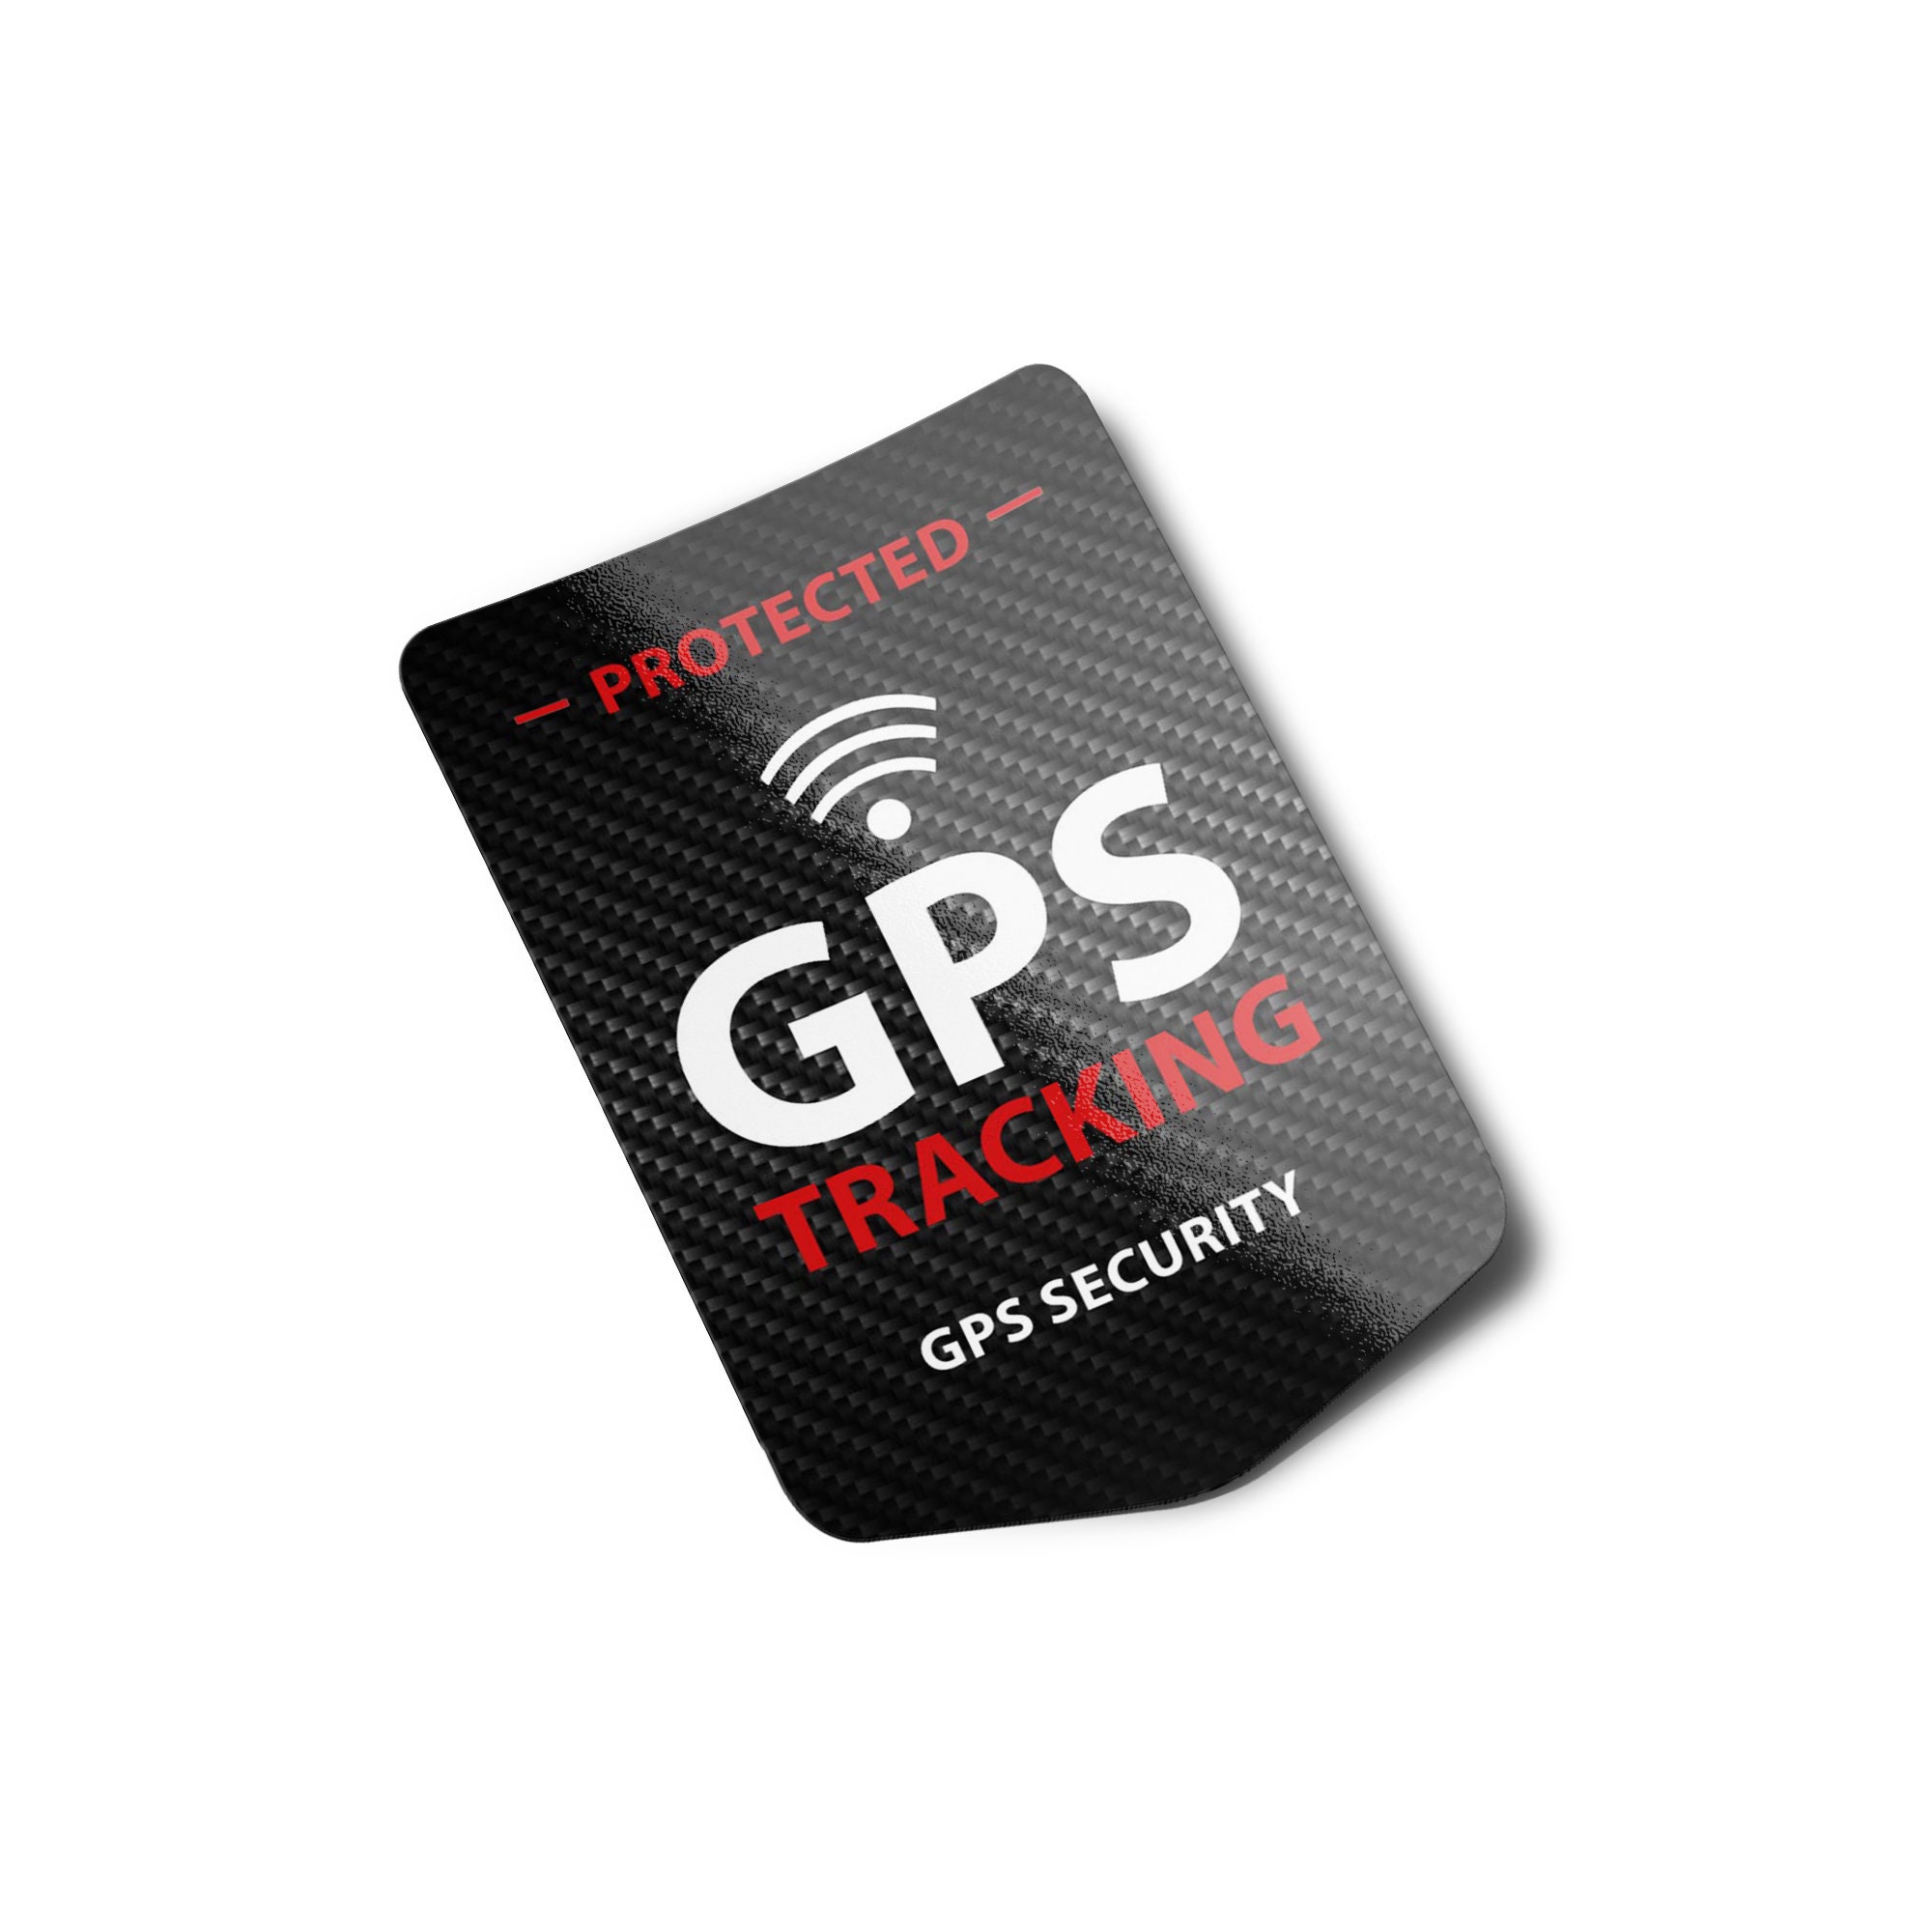 Gps tracking Car Decal - TenStickers